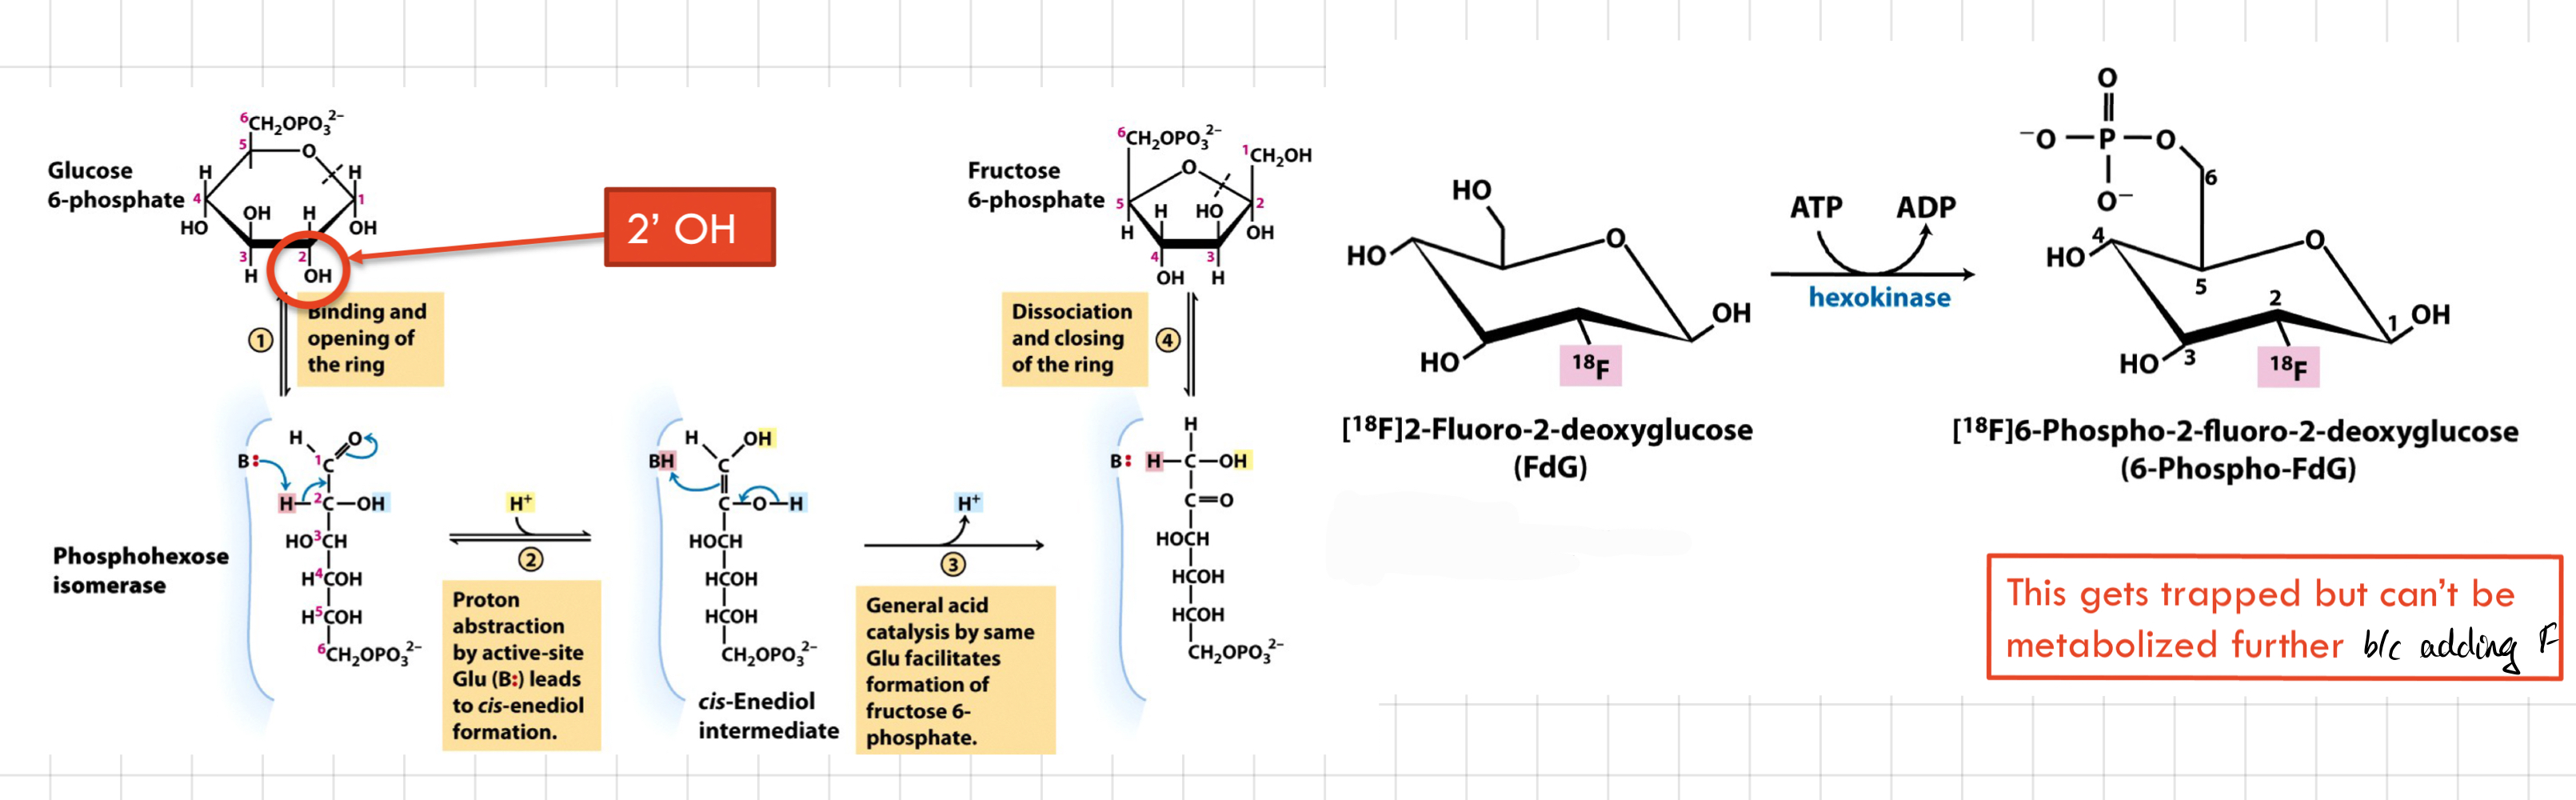 <ul><li><p>B/c it lacks a hydroxyl group (OH-) at the C2 position</p></li><li><p>Preventing it from being efficiently phosphorylated by hexokinase.</p></li><li><p>A key step in glycolysis.</p></li><li><p>Acts as a <strong>competitive inhibitor of hexokinase</strong> and <strong>blocks</strong> the entry of glucose into the glycolytic pathway.</p></li></ul>